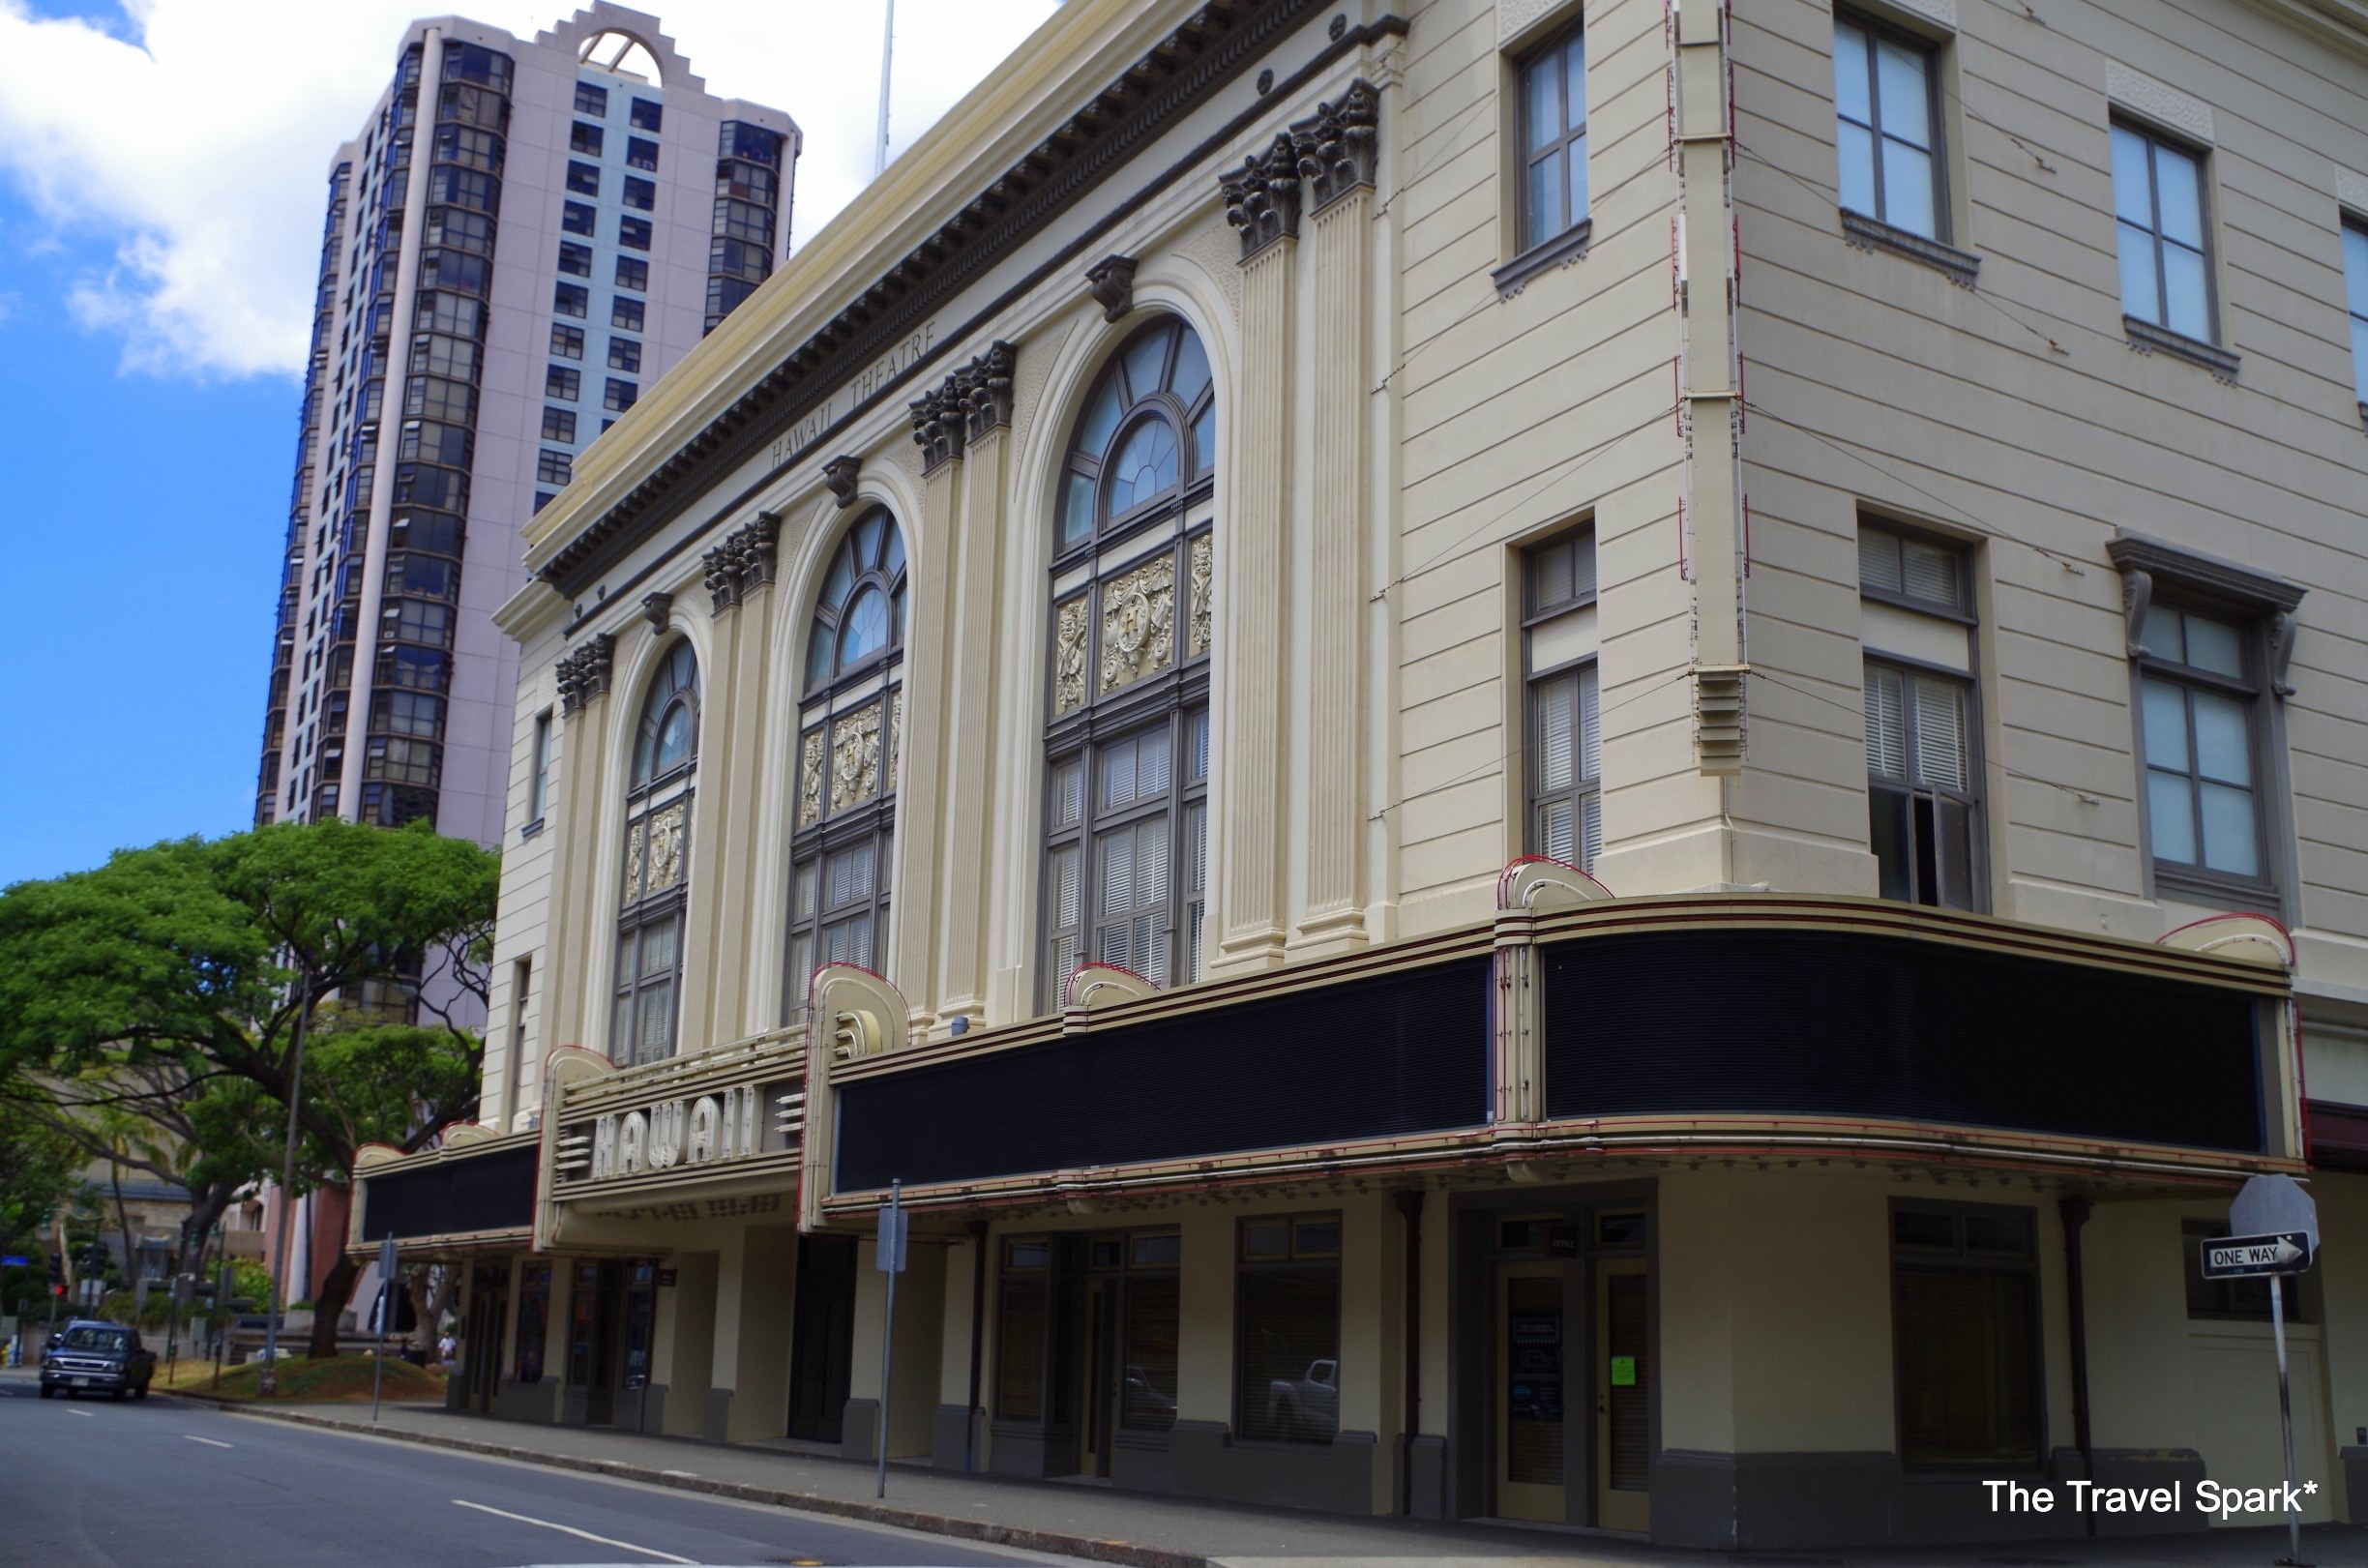 The historic Hawaii Theater located in downtown (Chinatown District) of Honolulu.